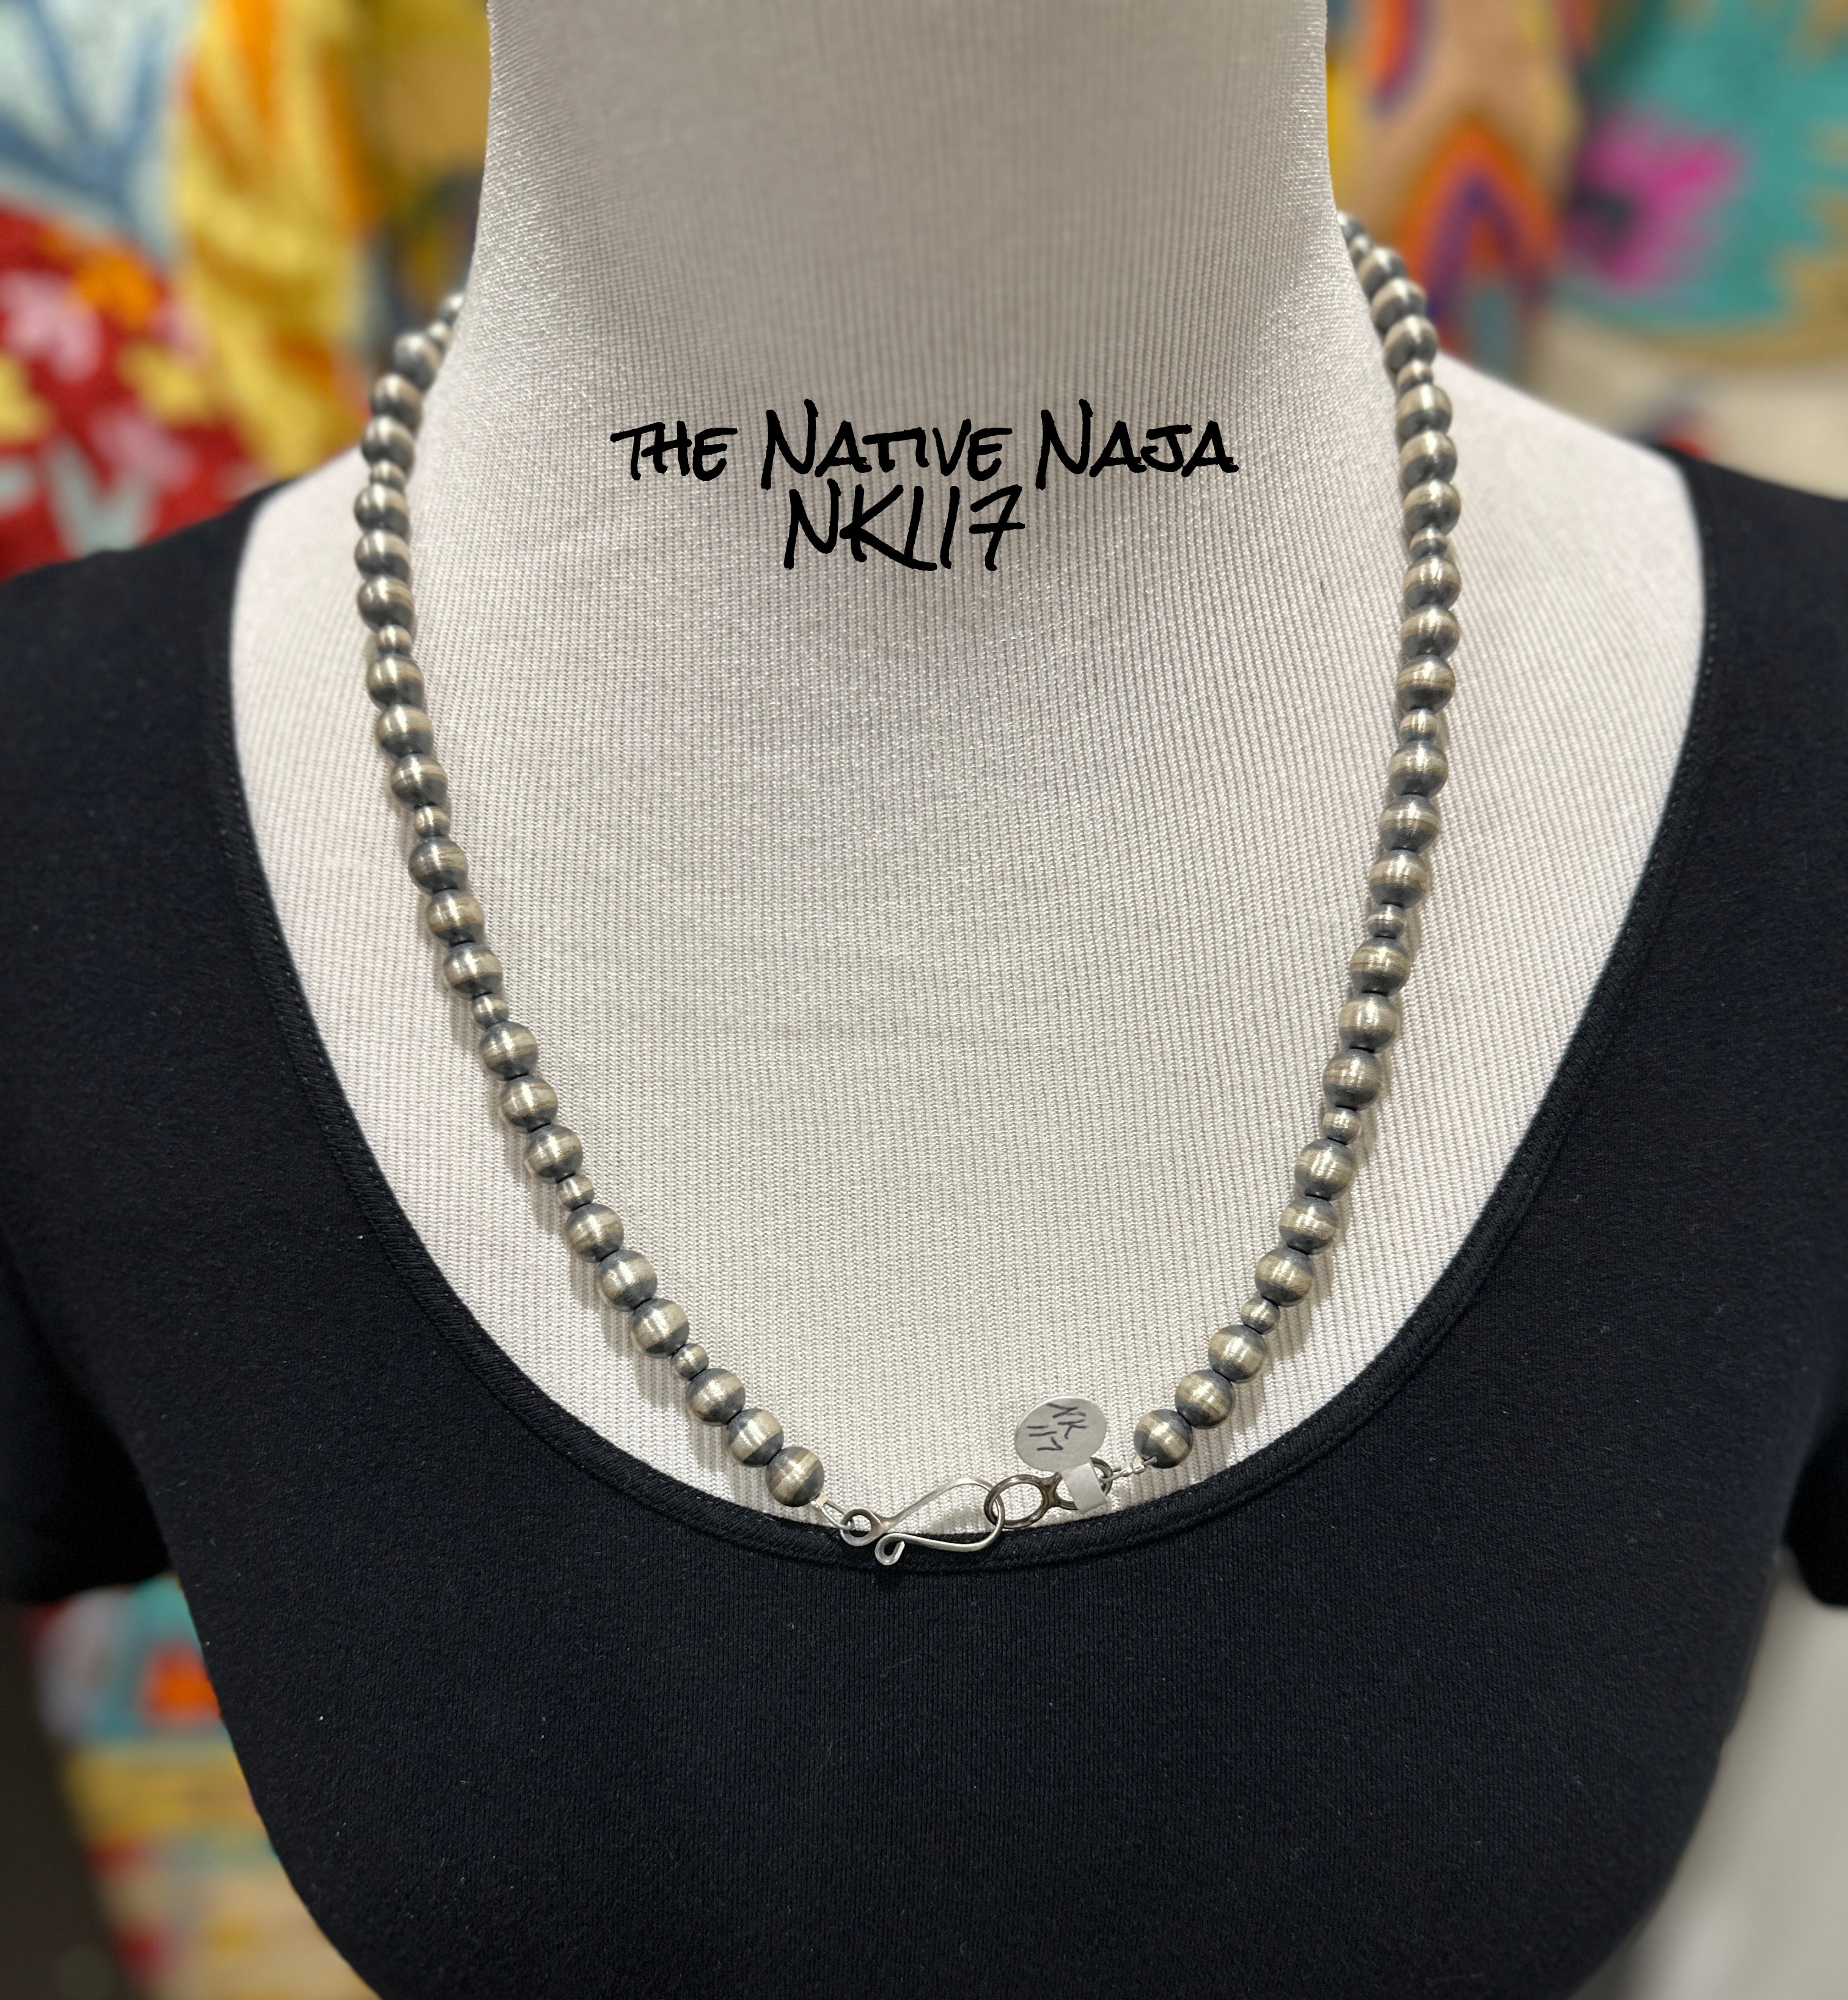 24" Chimney Butte Sterling Silver 5 & 8mm Oxidized Navajo Pearls Necklace NK117